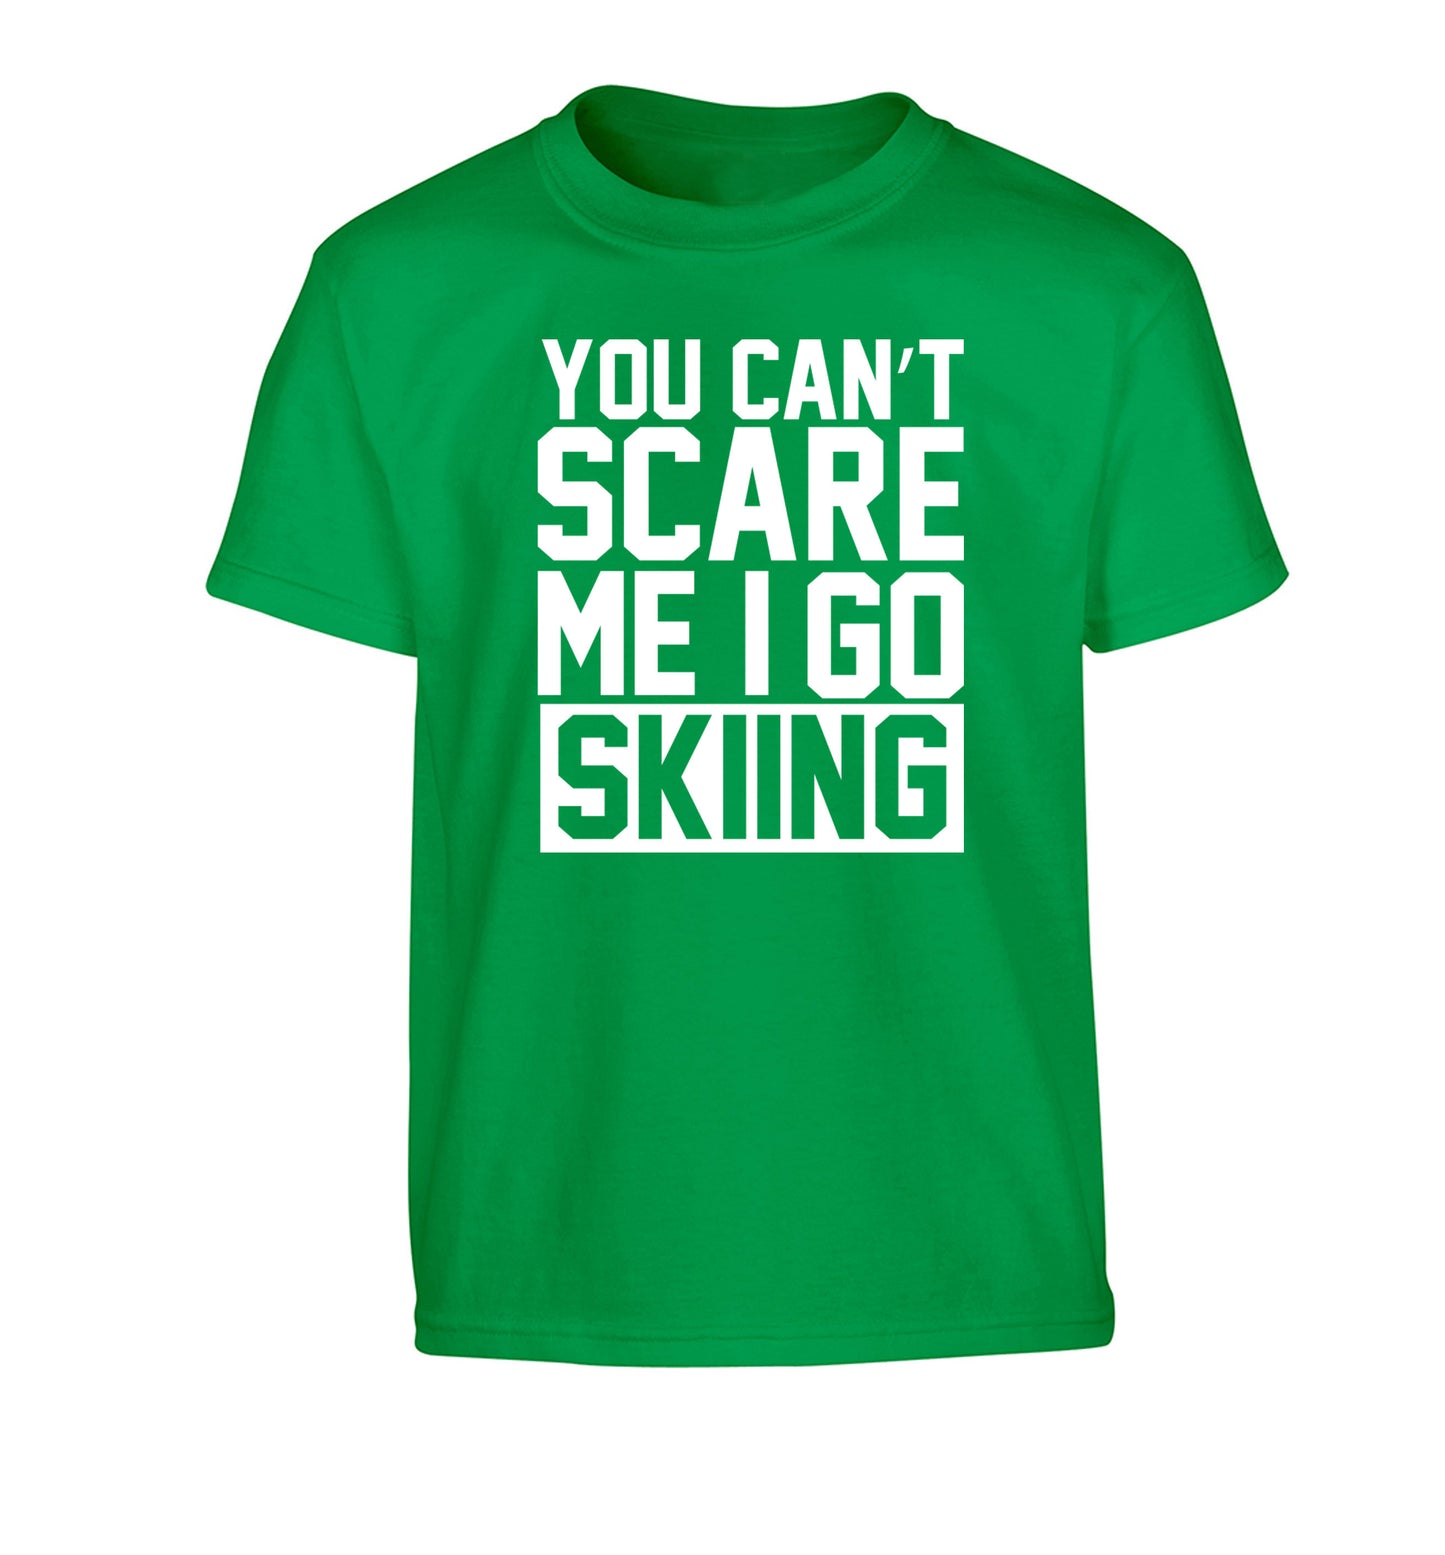 You can't scare me I go skiing Children's green Tshirt 12-14 Years